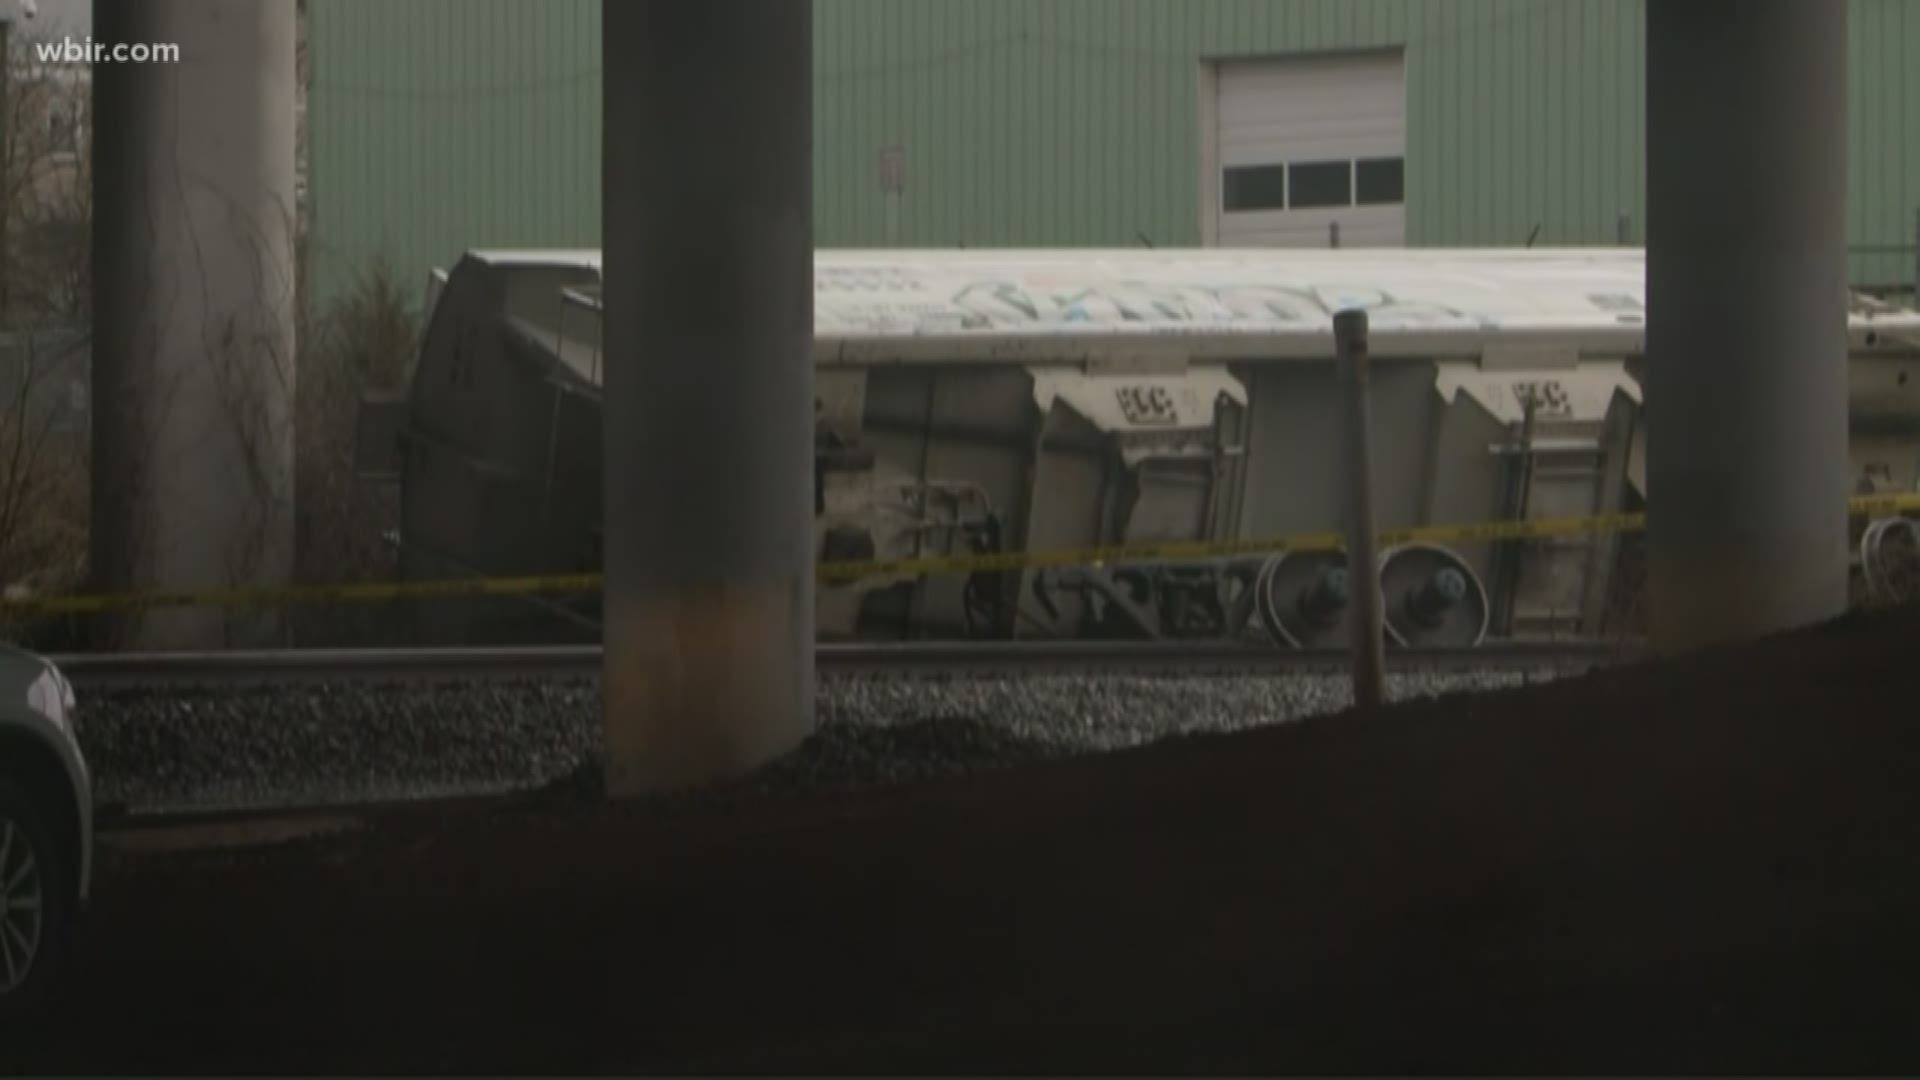 Knoxville police and fire crews responded to Concord Street after seven train cars derailed Wednesday afternoon.